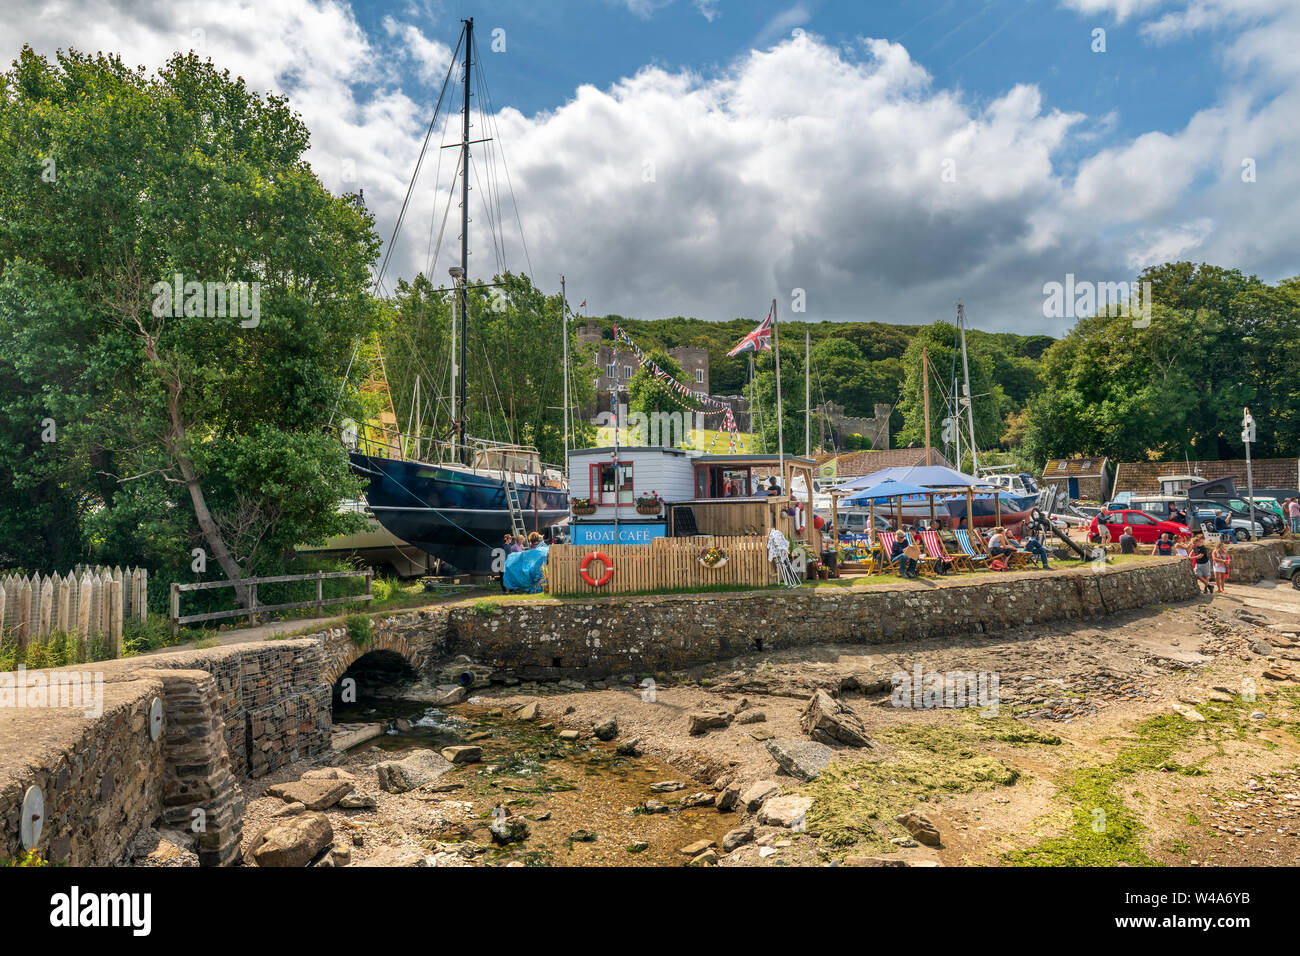 Watermouth Harbour, Berrynarbor, near Ilfracombe, North Devon, England. Sunday 21st July 2019. UK Weather.  Despite the gathering cloud holidaymakers enjoy the long sunny intervals and admire the view over Watermouth Harbour as they take refreshments at the 'Storm in a Teacup cafe'. Credit: Terry Mathews/Alamy Live News Stock Photo